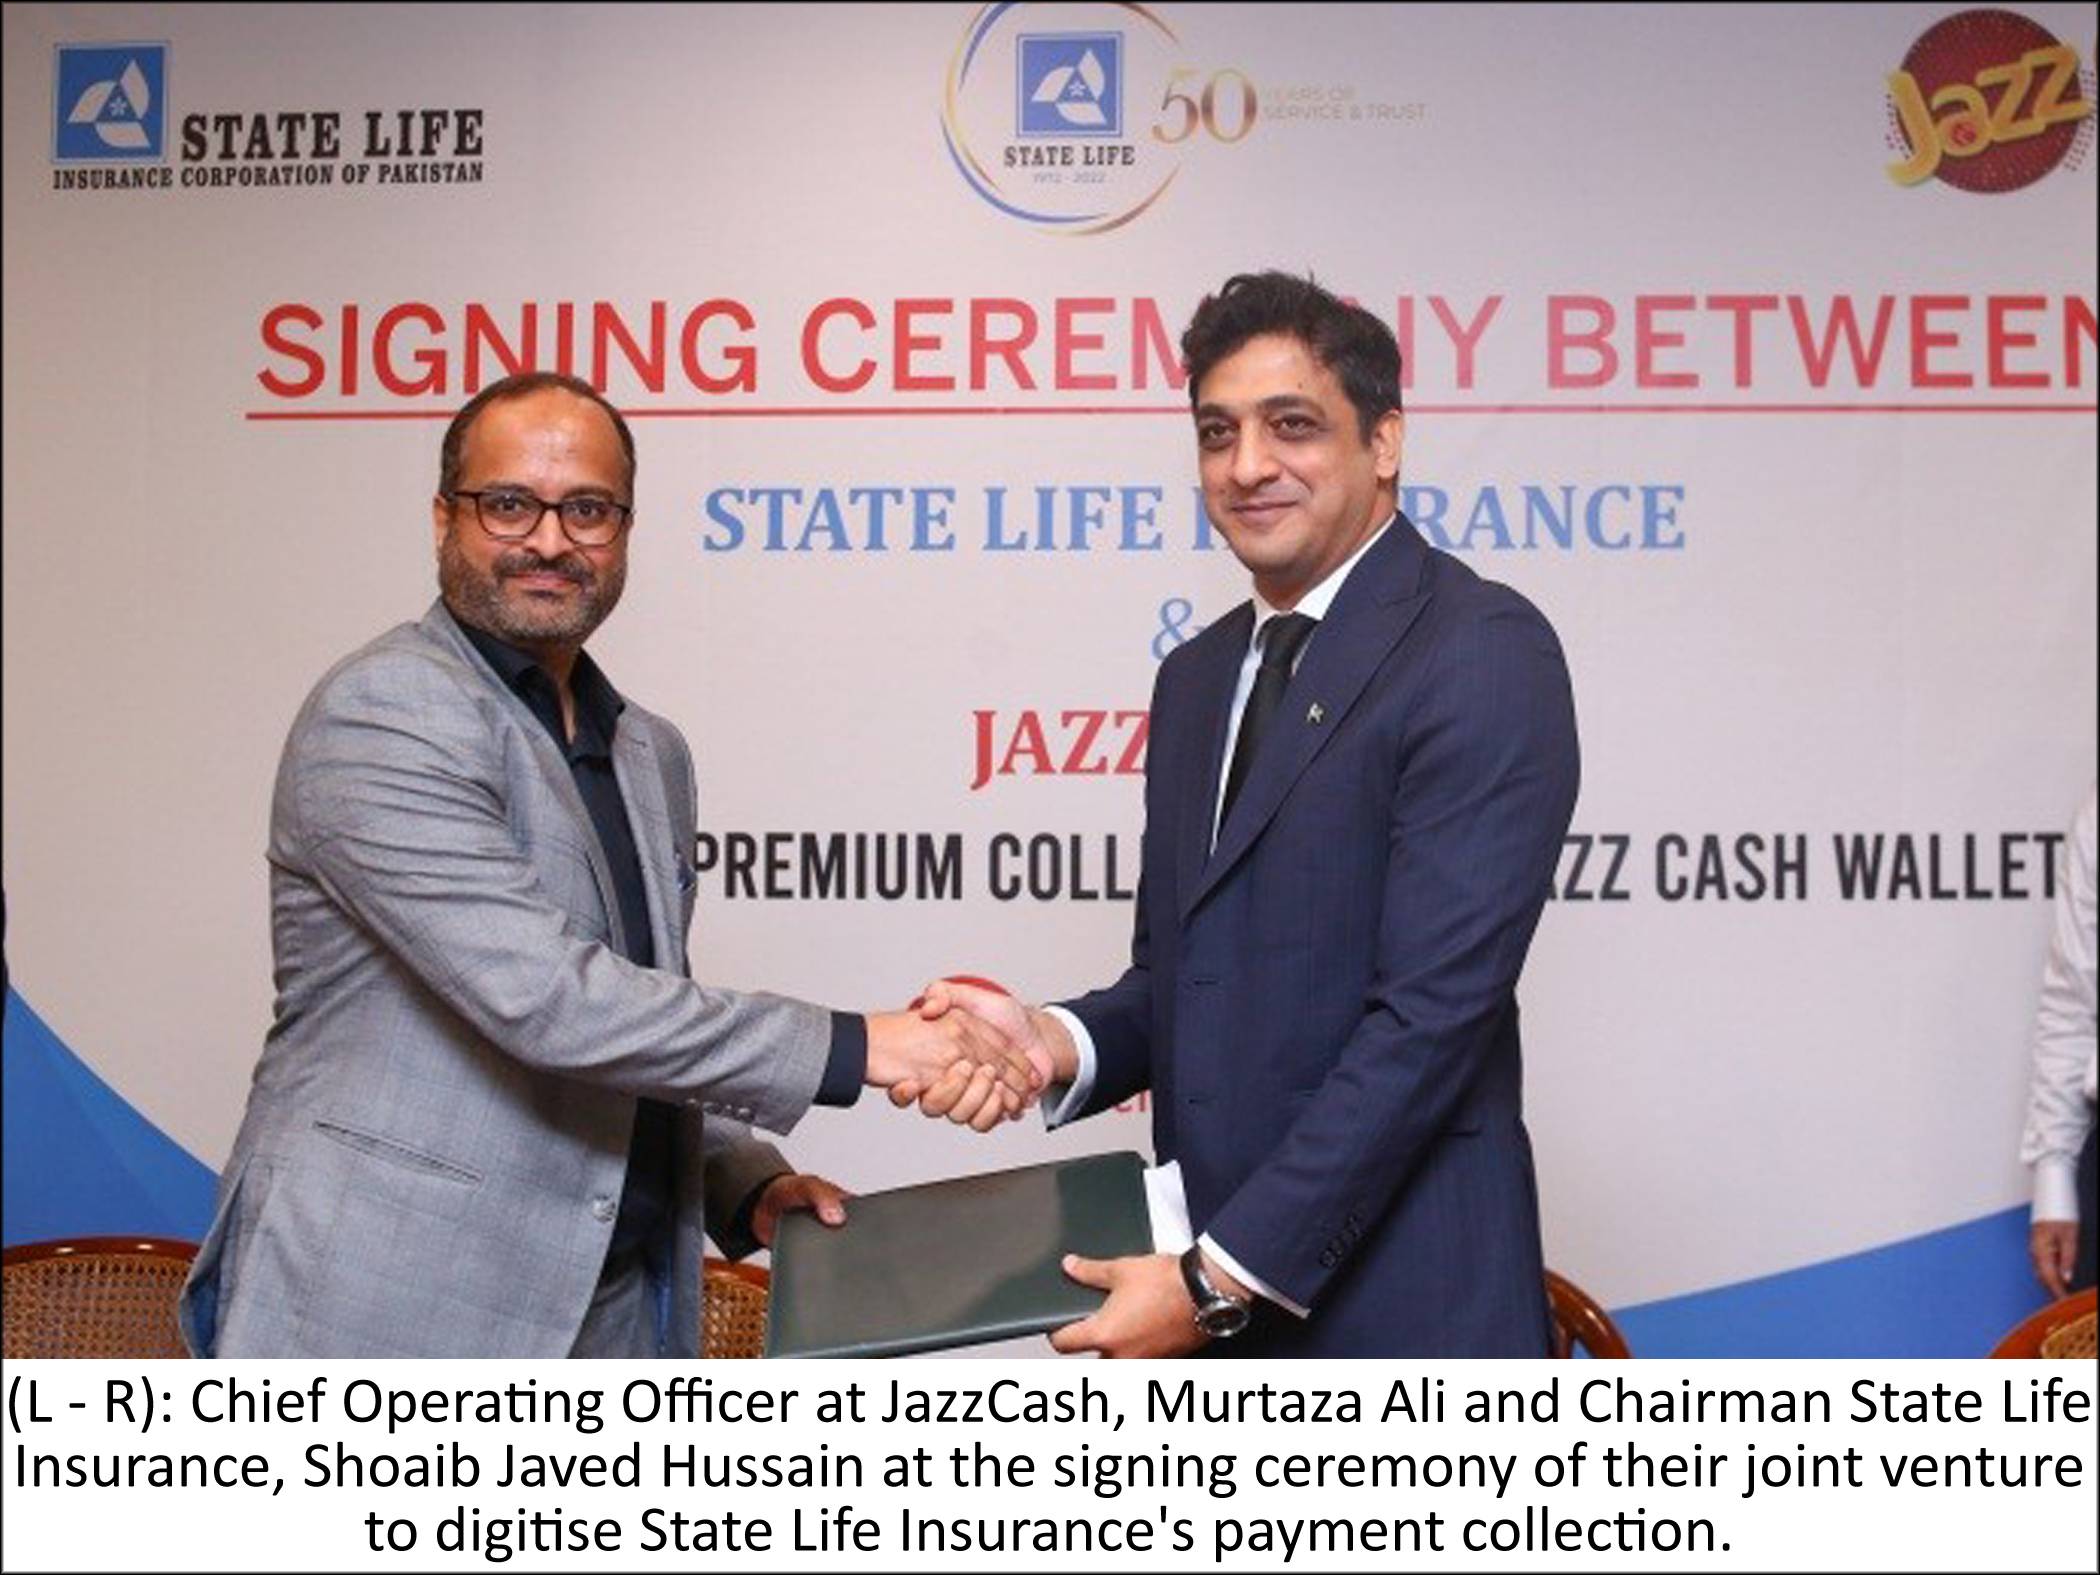 State Life Insurance partners with JazzCash to Digitize Payment Collection